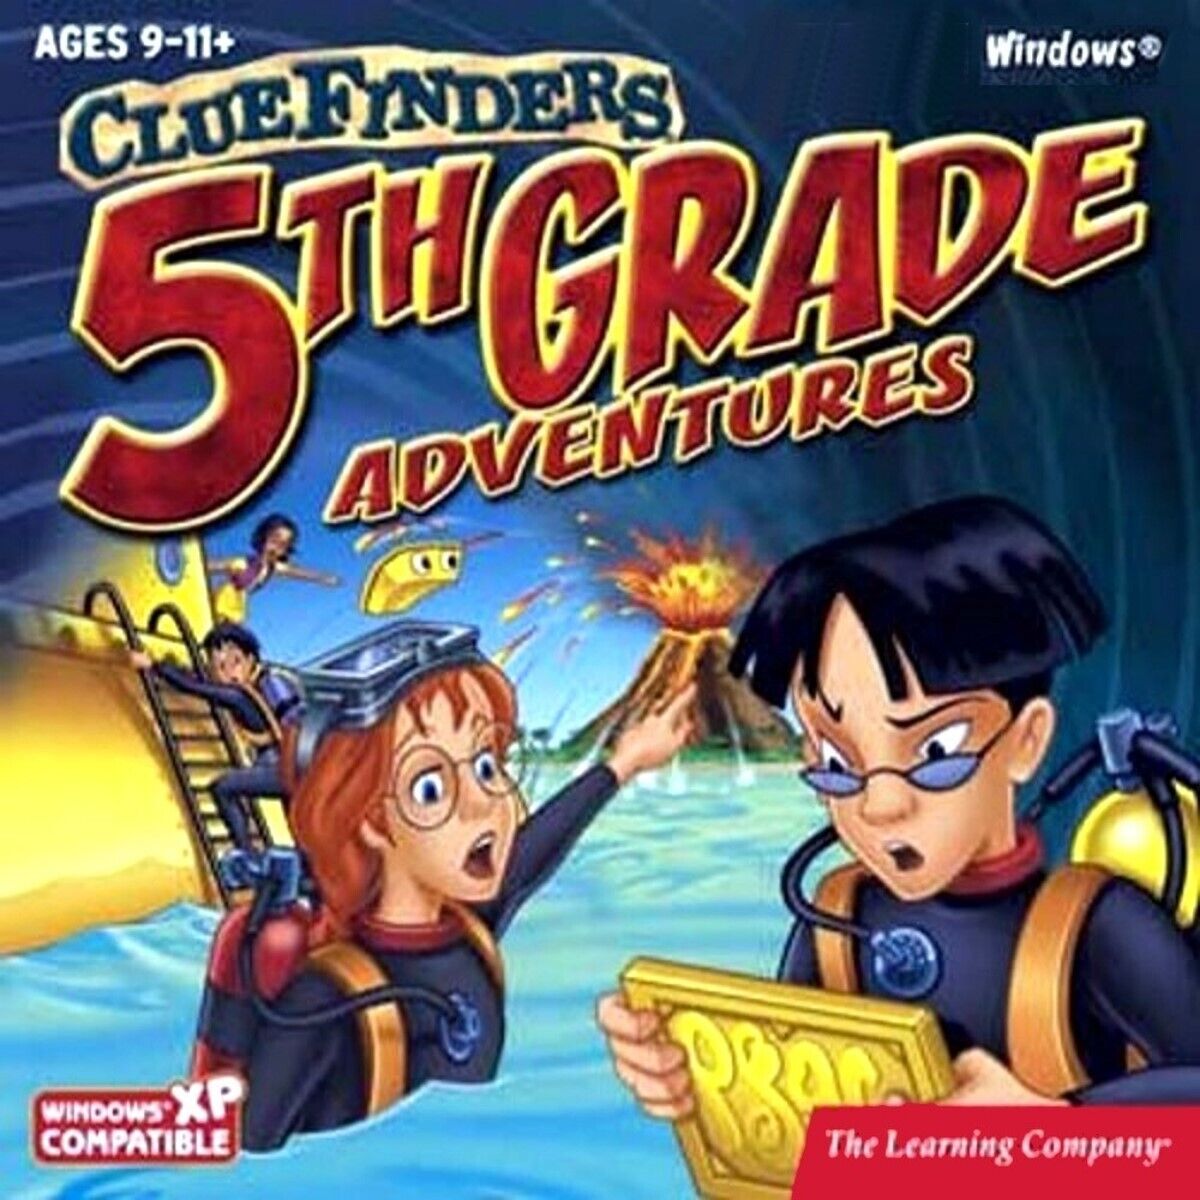 Cluefinders 5th Grade Adventures Ages 9 - 11+ The Learning Company New Sealed